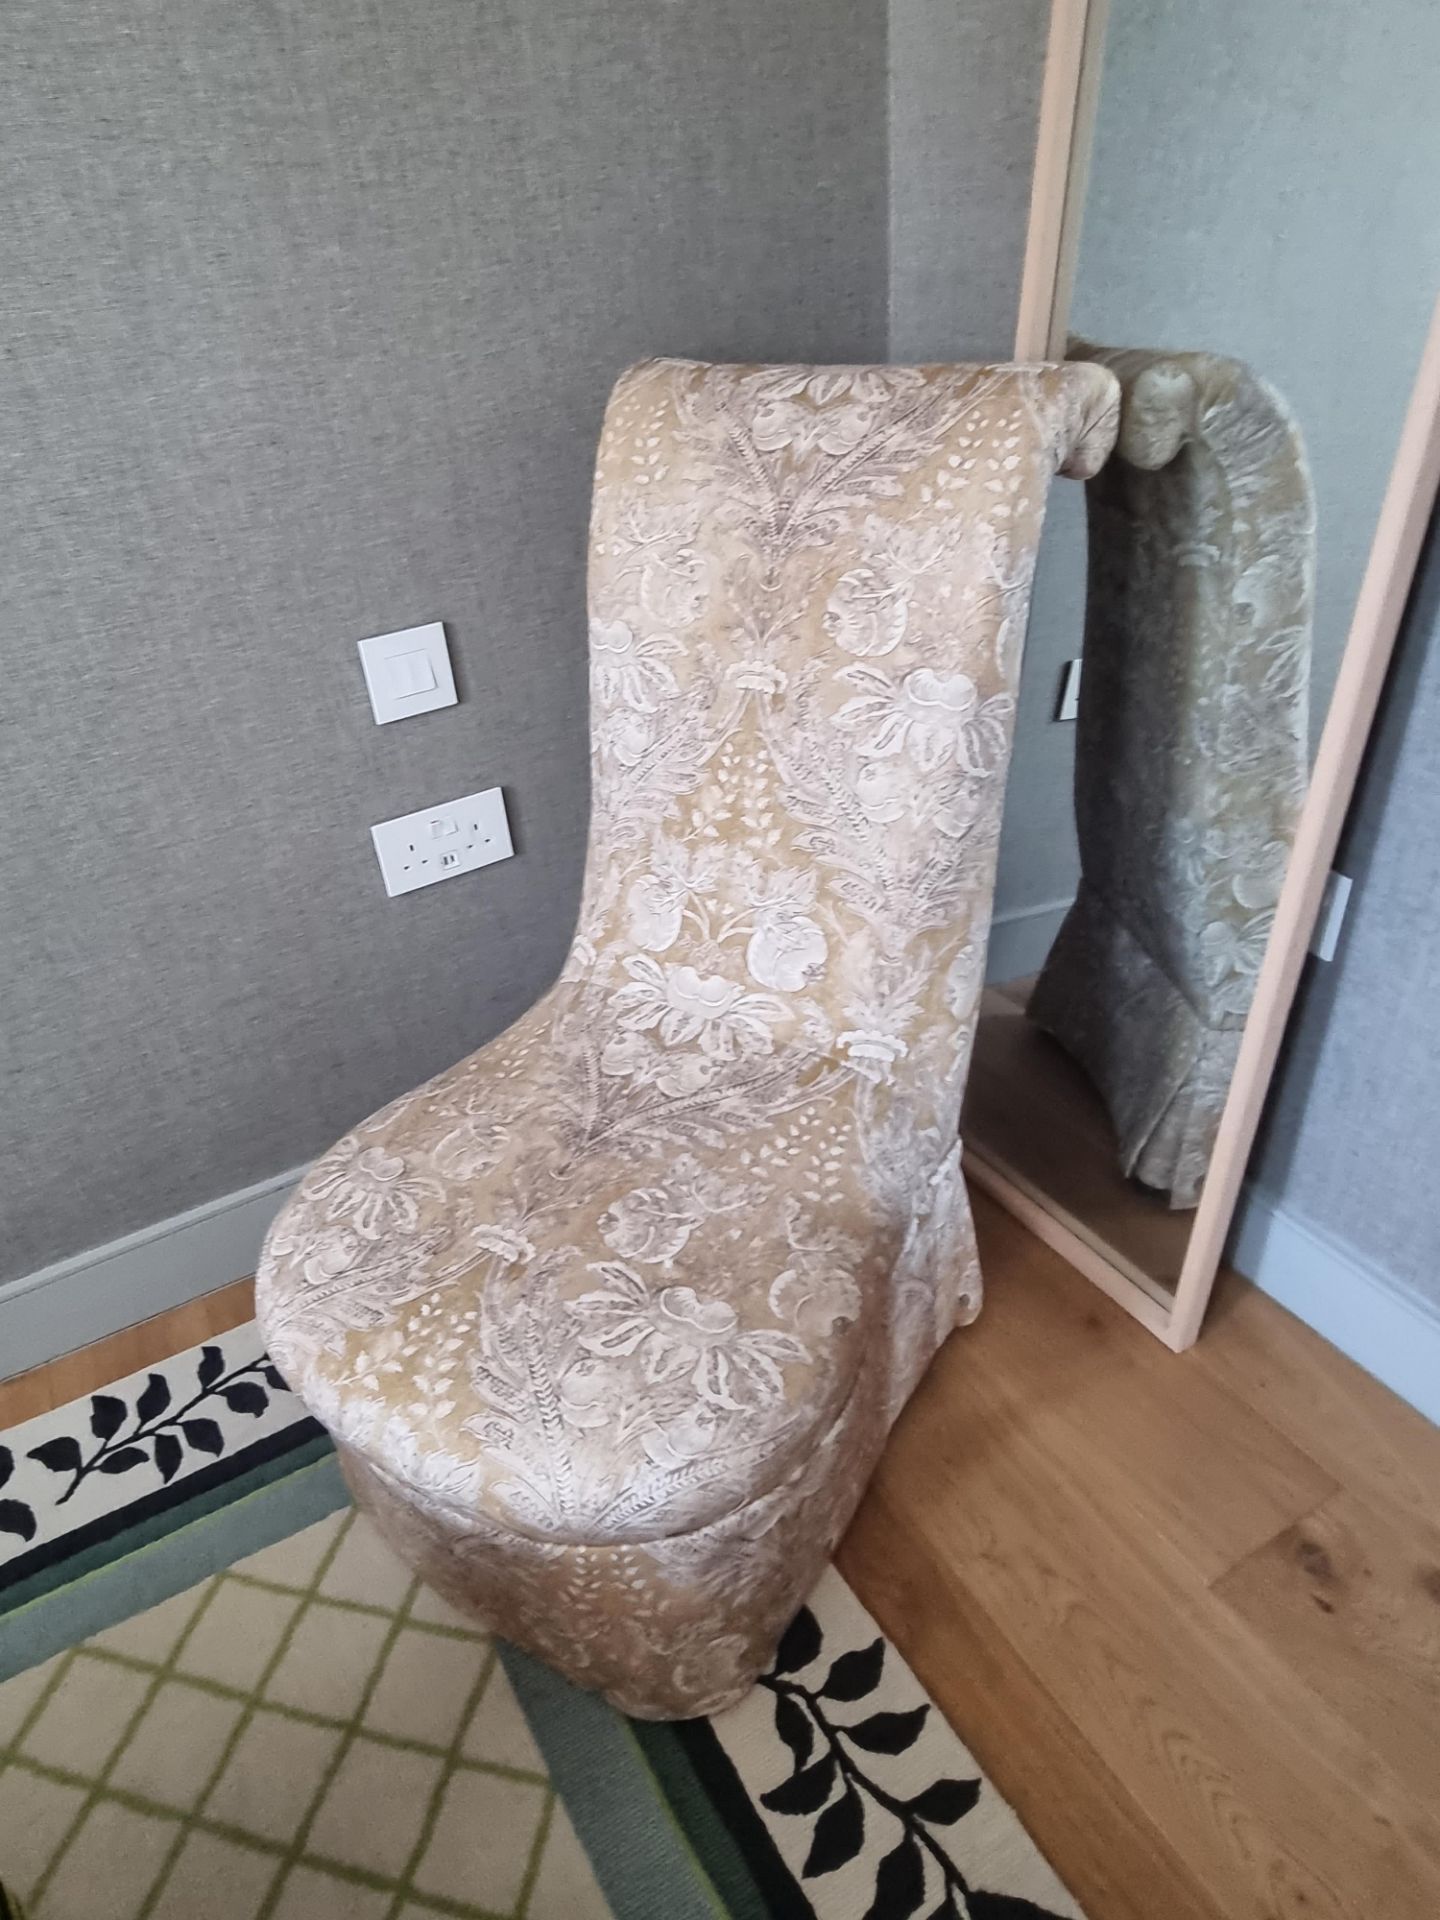 A Victorian Slipper Chair Reupurposed with a Seven Upholstery Damask Slipcover Bedroom Chair   (